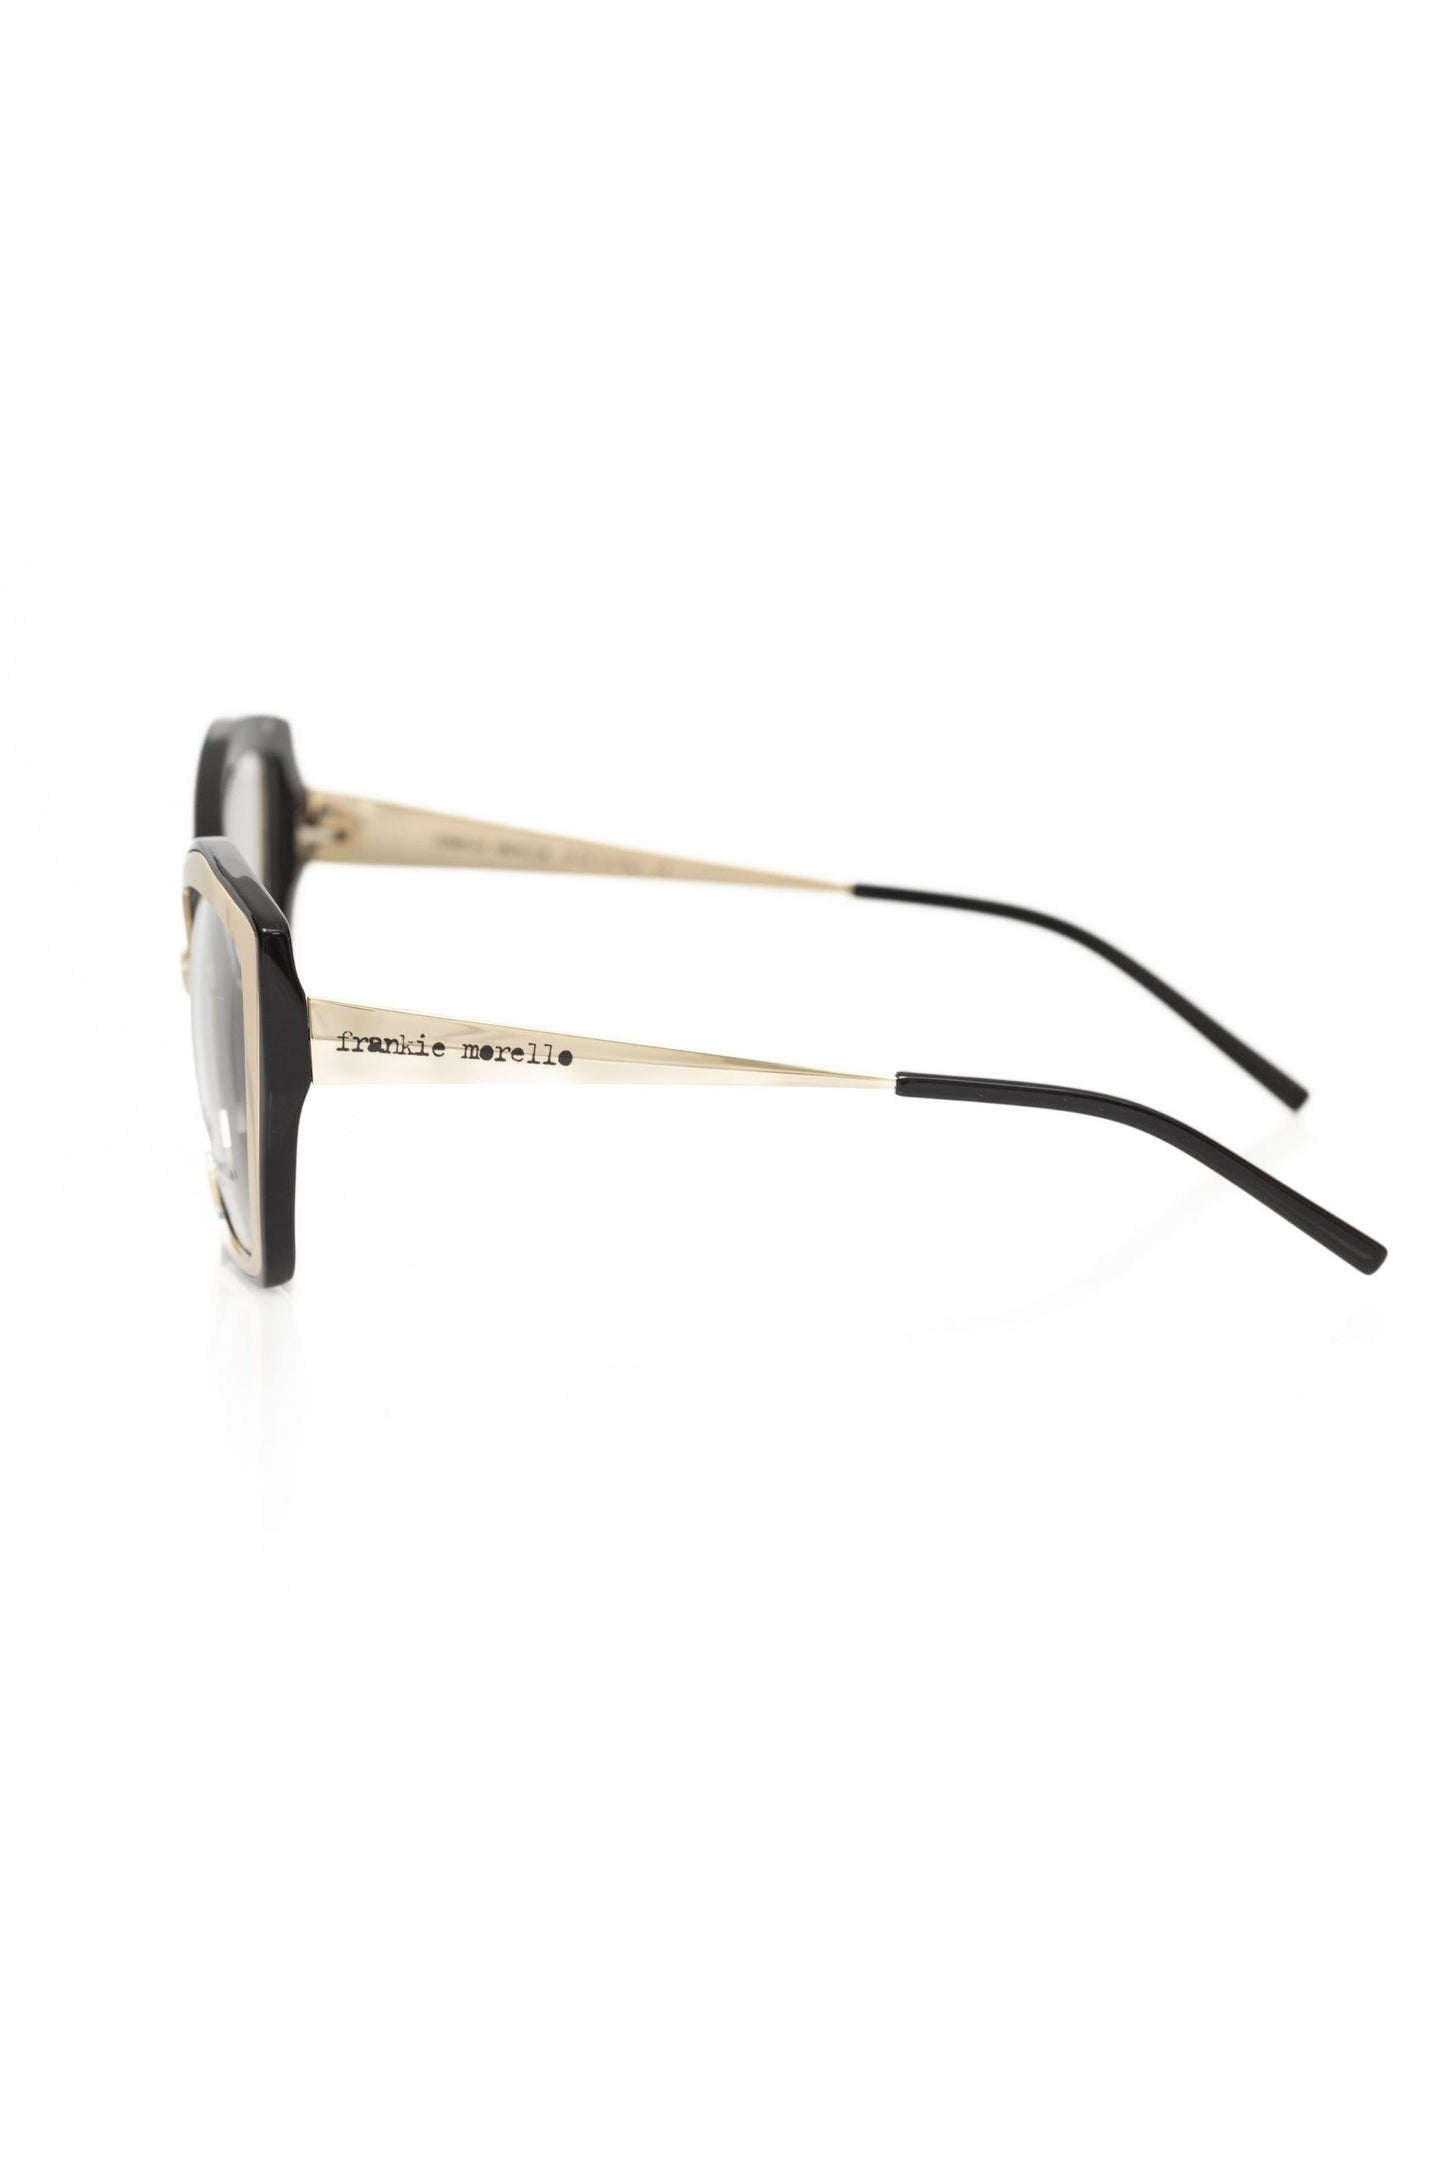 Frankie Morello FRMO-22095 Multicolor Acetate Frames - Designed by Frankie Morello Available to Buy at a Discounted Price on Moon Behind The Hill Online Designer Discount Store